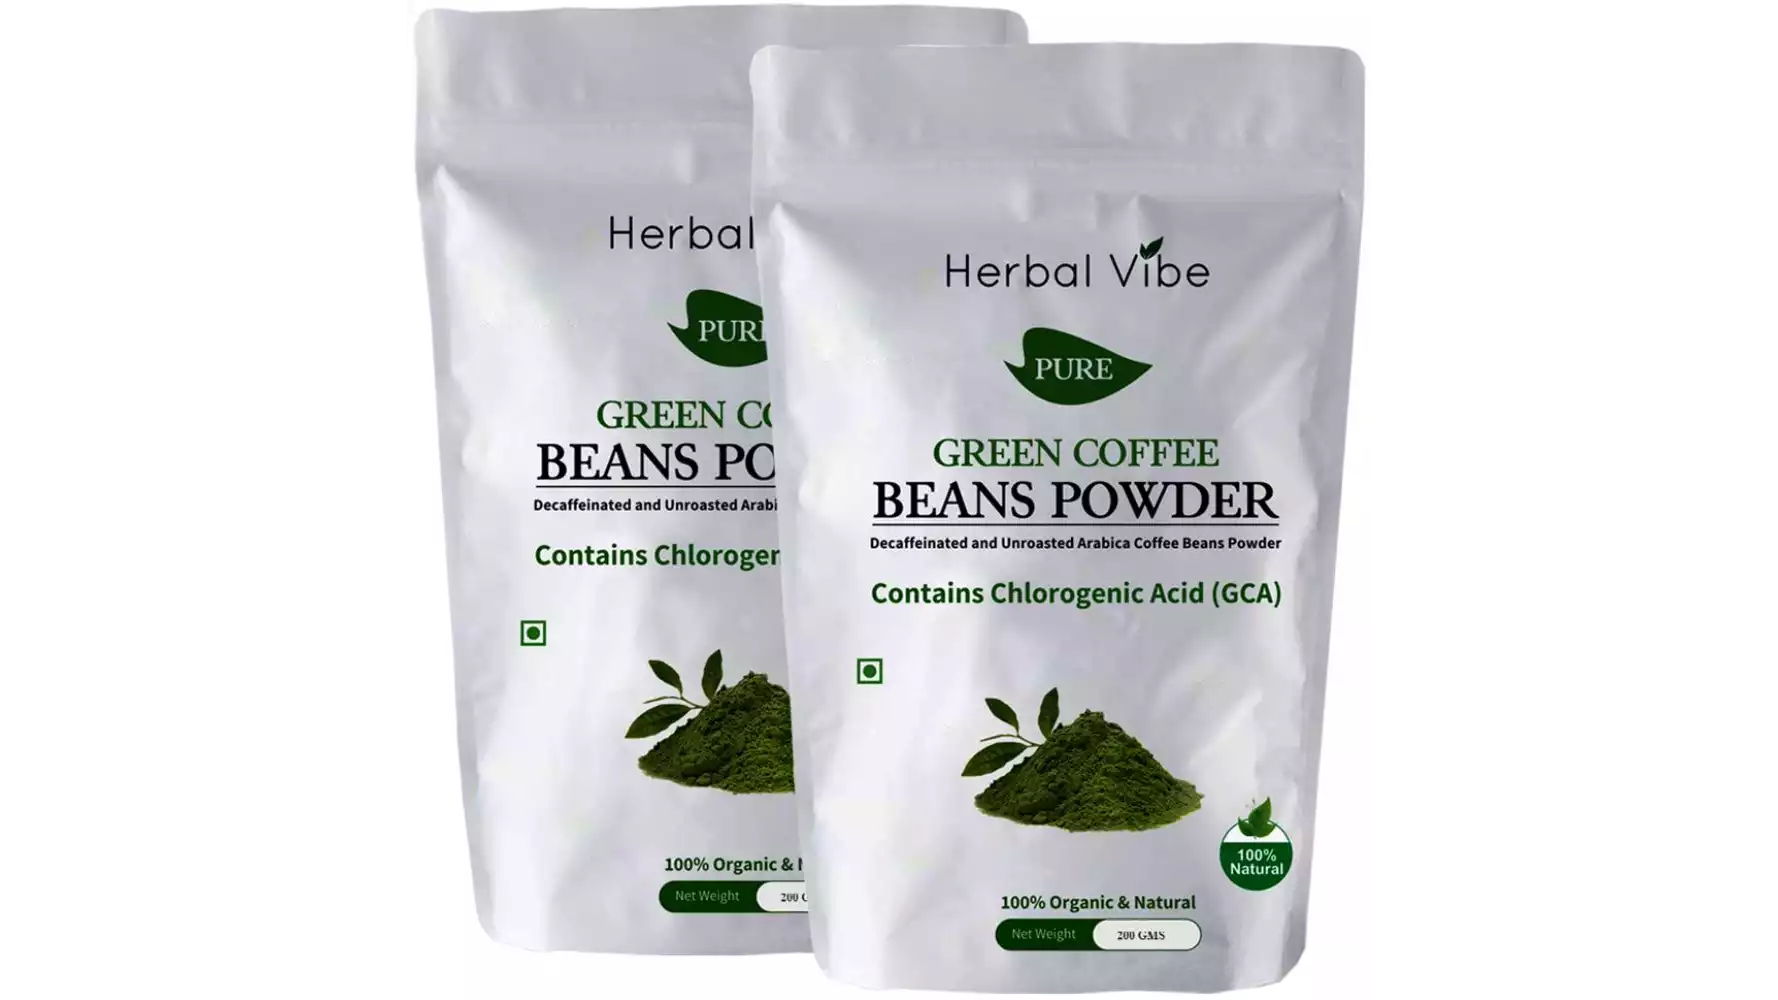 Herbal Vibe Pure Green Coffee Beans Powder (200g, Pack of 2)